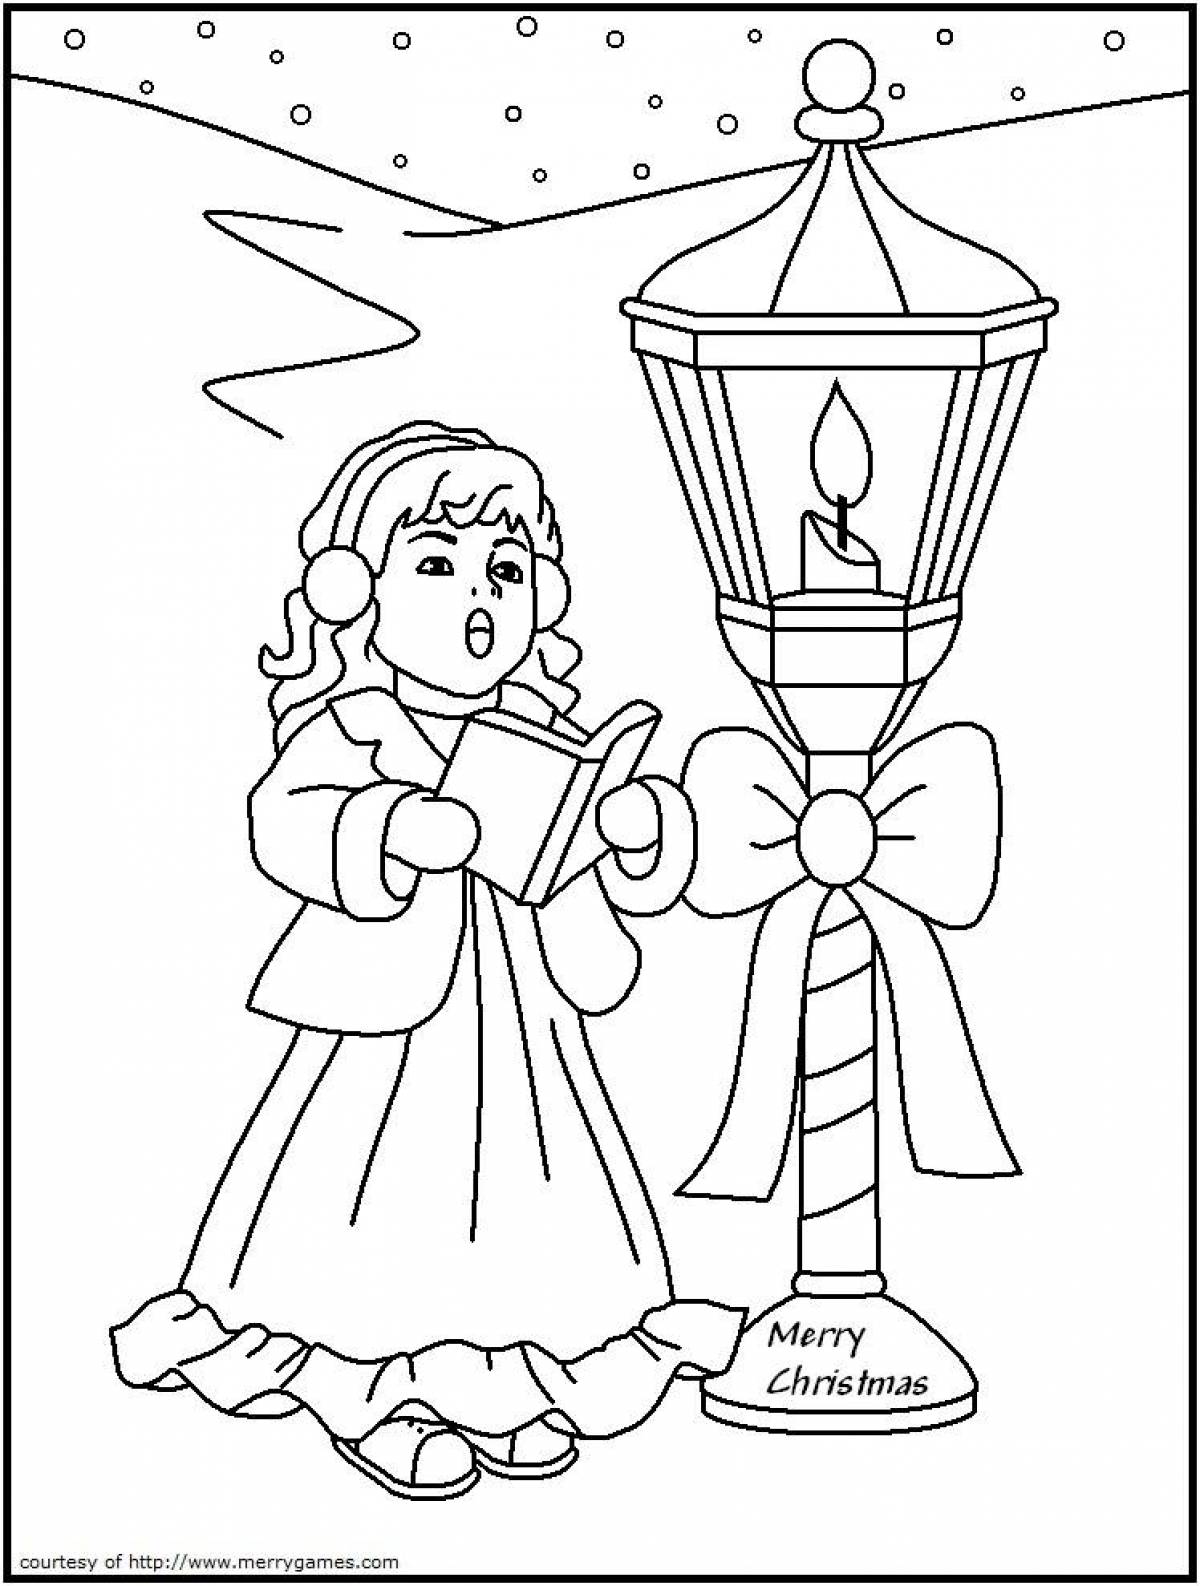 Great coloring pages of Christmas carols for kids